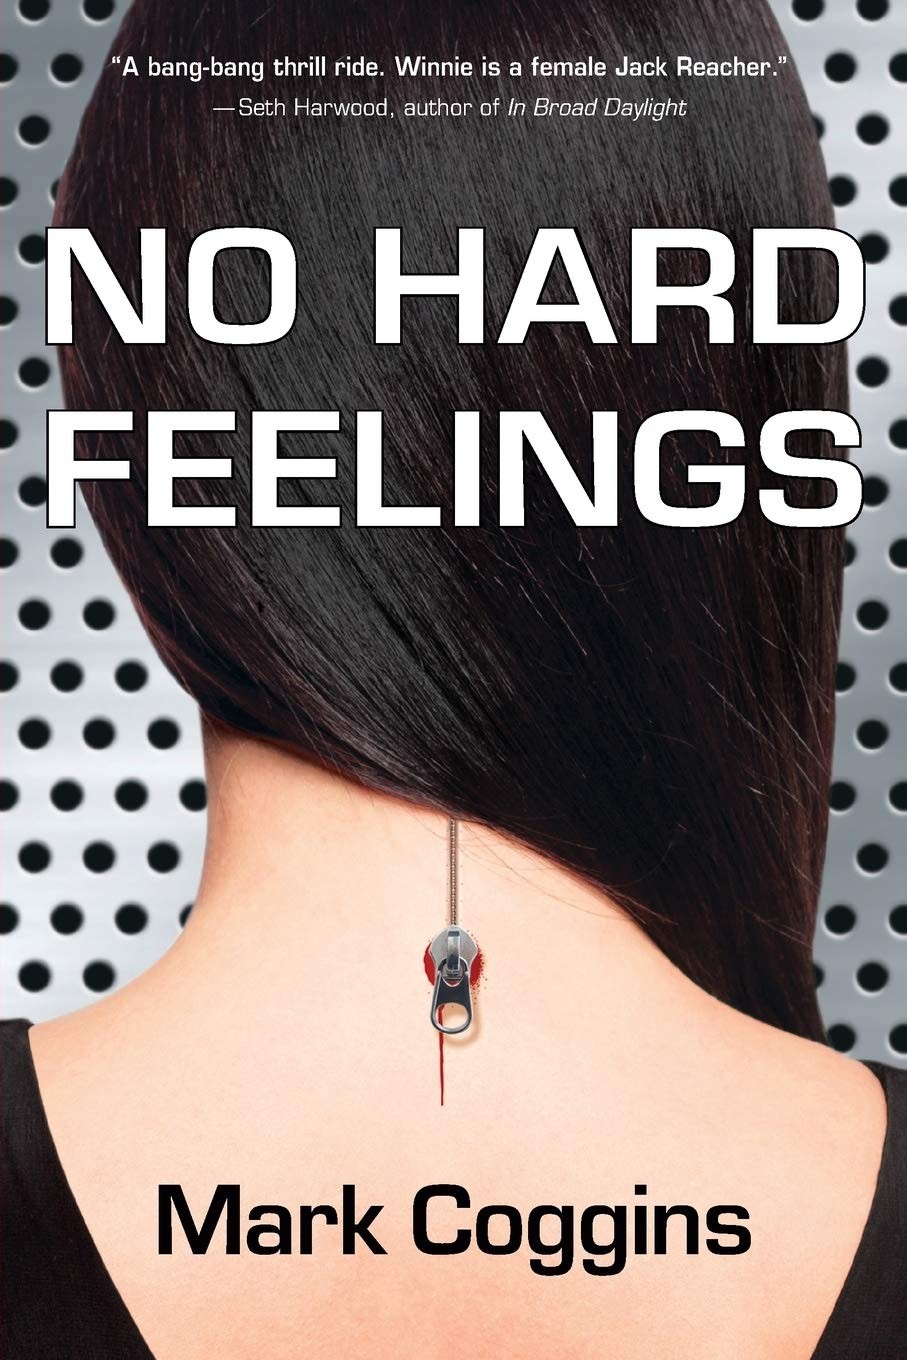 Book cover for the novel NO HARD FEELINGS, showing the back of a young woman's head with a zipper running down her neck, suggesting surgery associated with an implant.